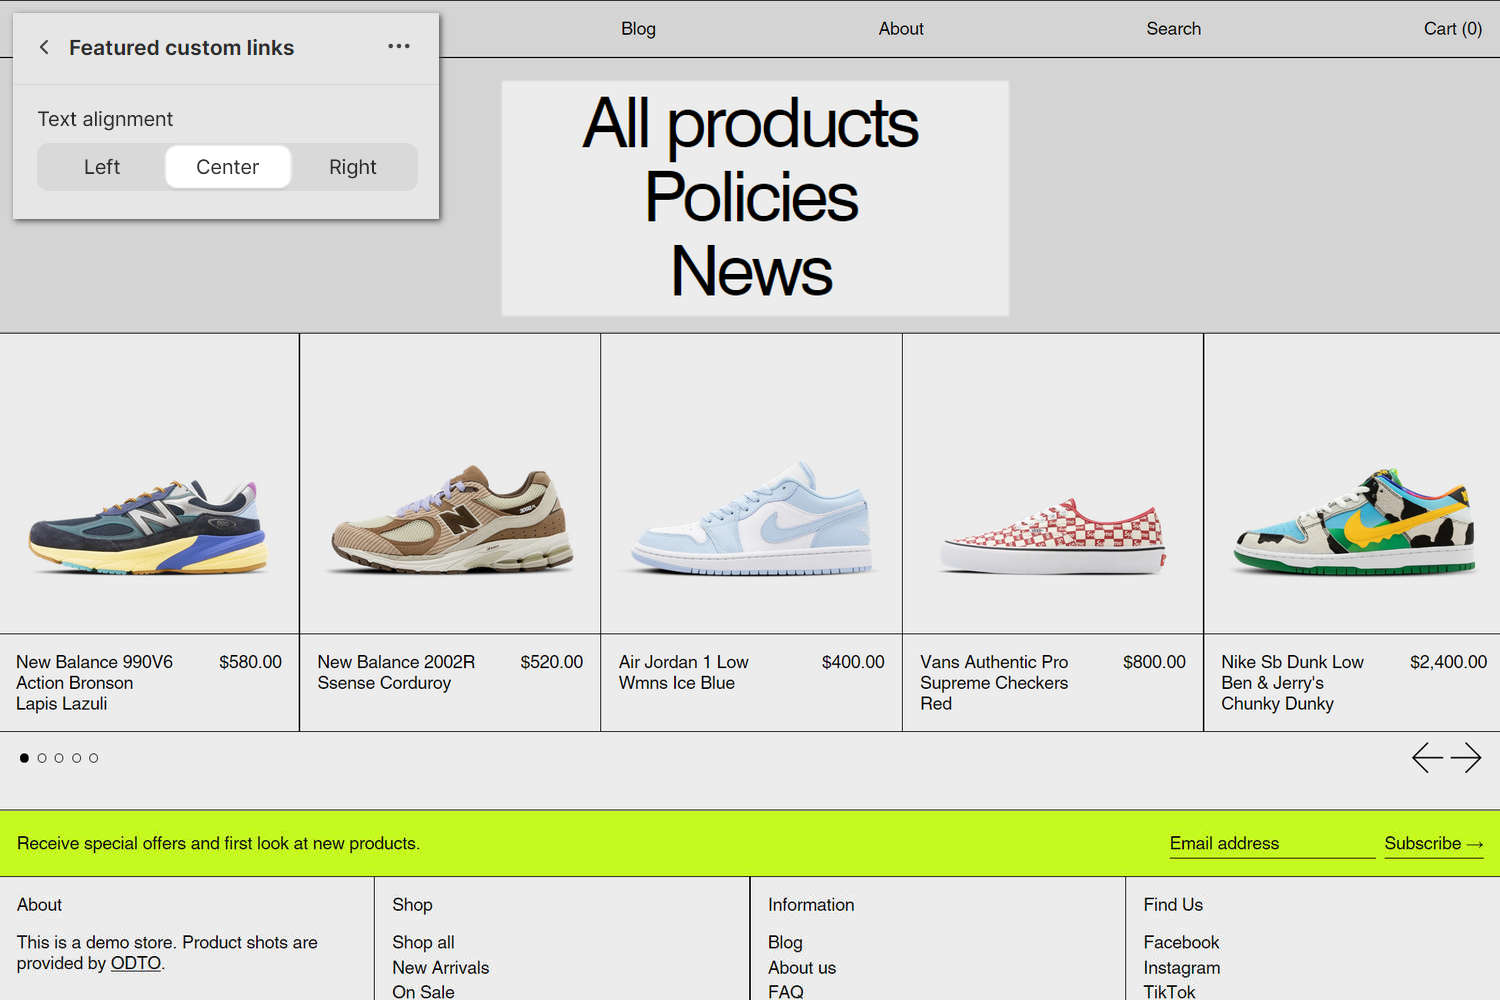 An example Featured custom links section on a store's home page.